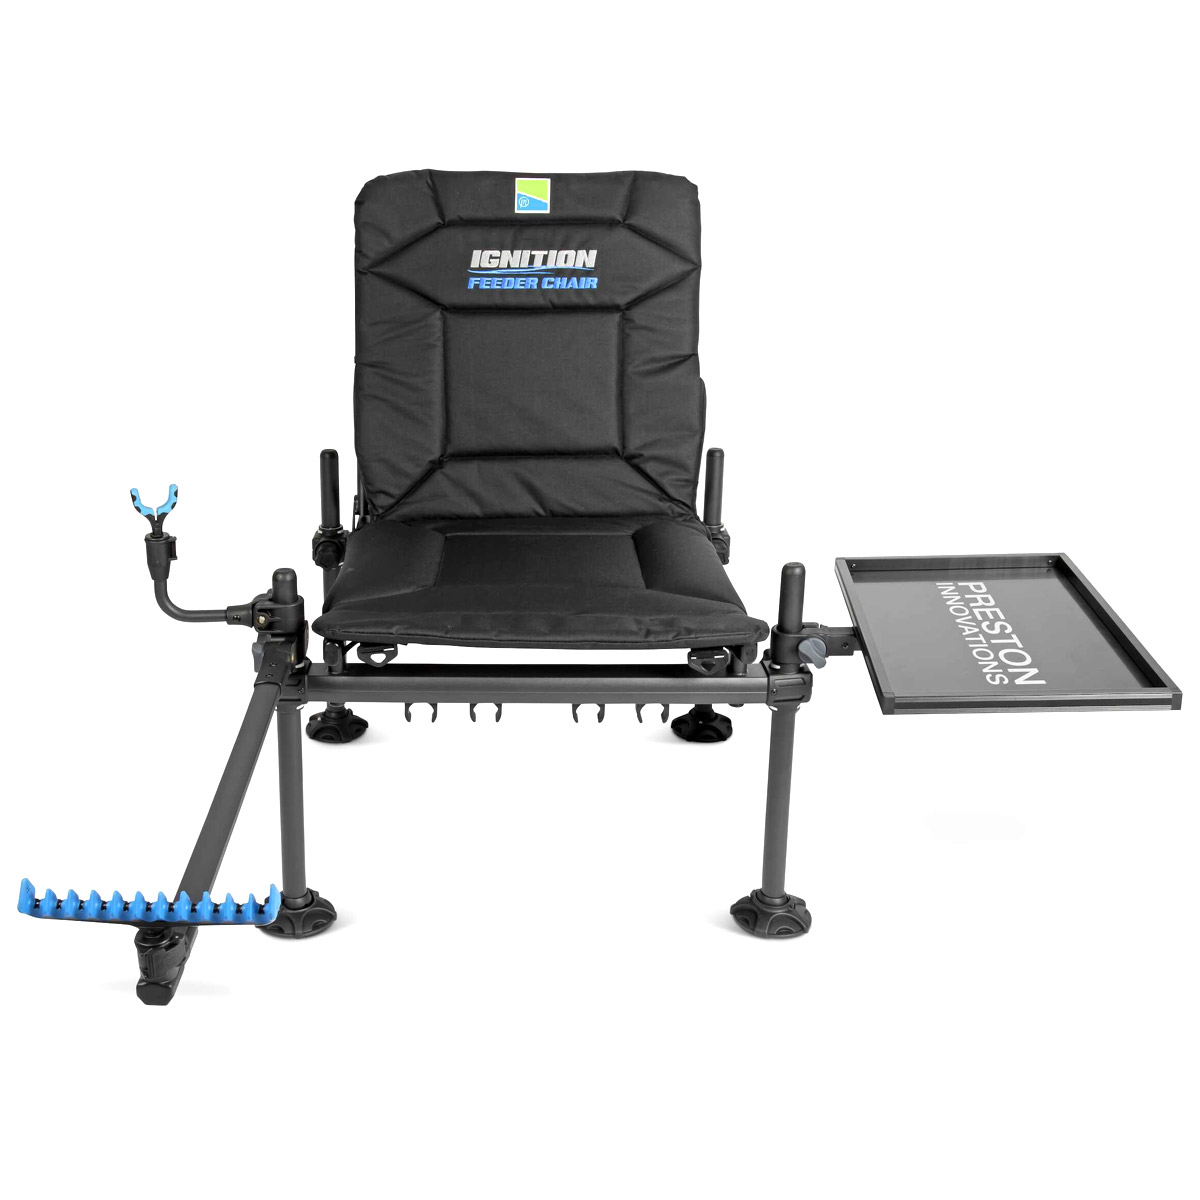 Preston Innovations Ignition Feeder Chair Combo